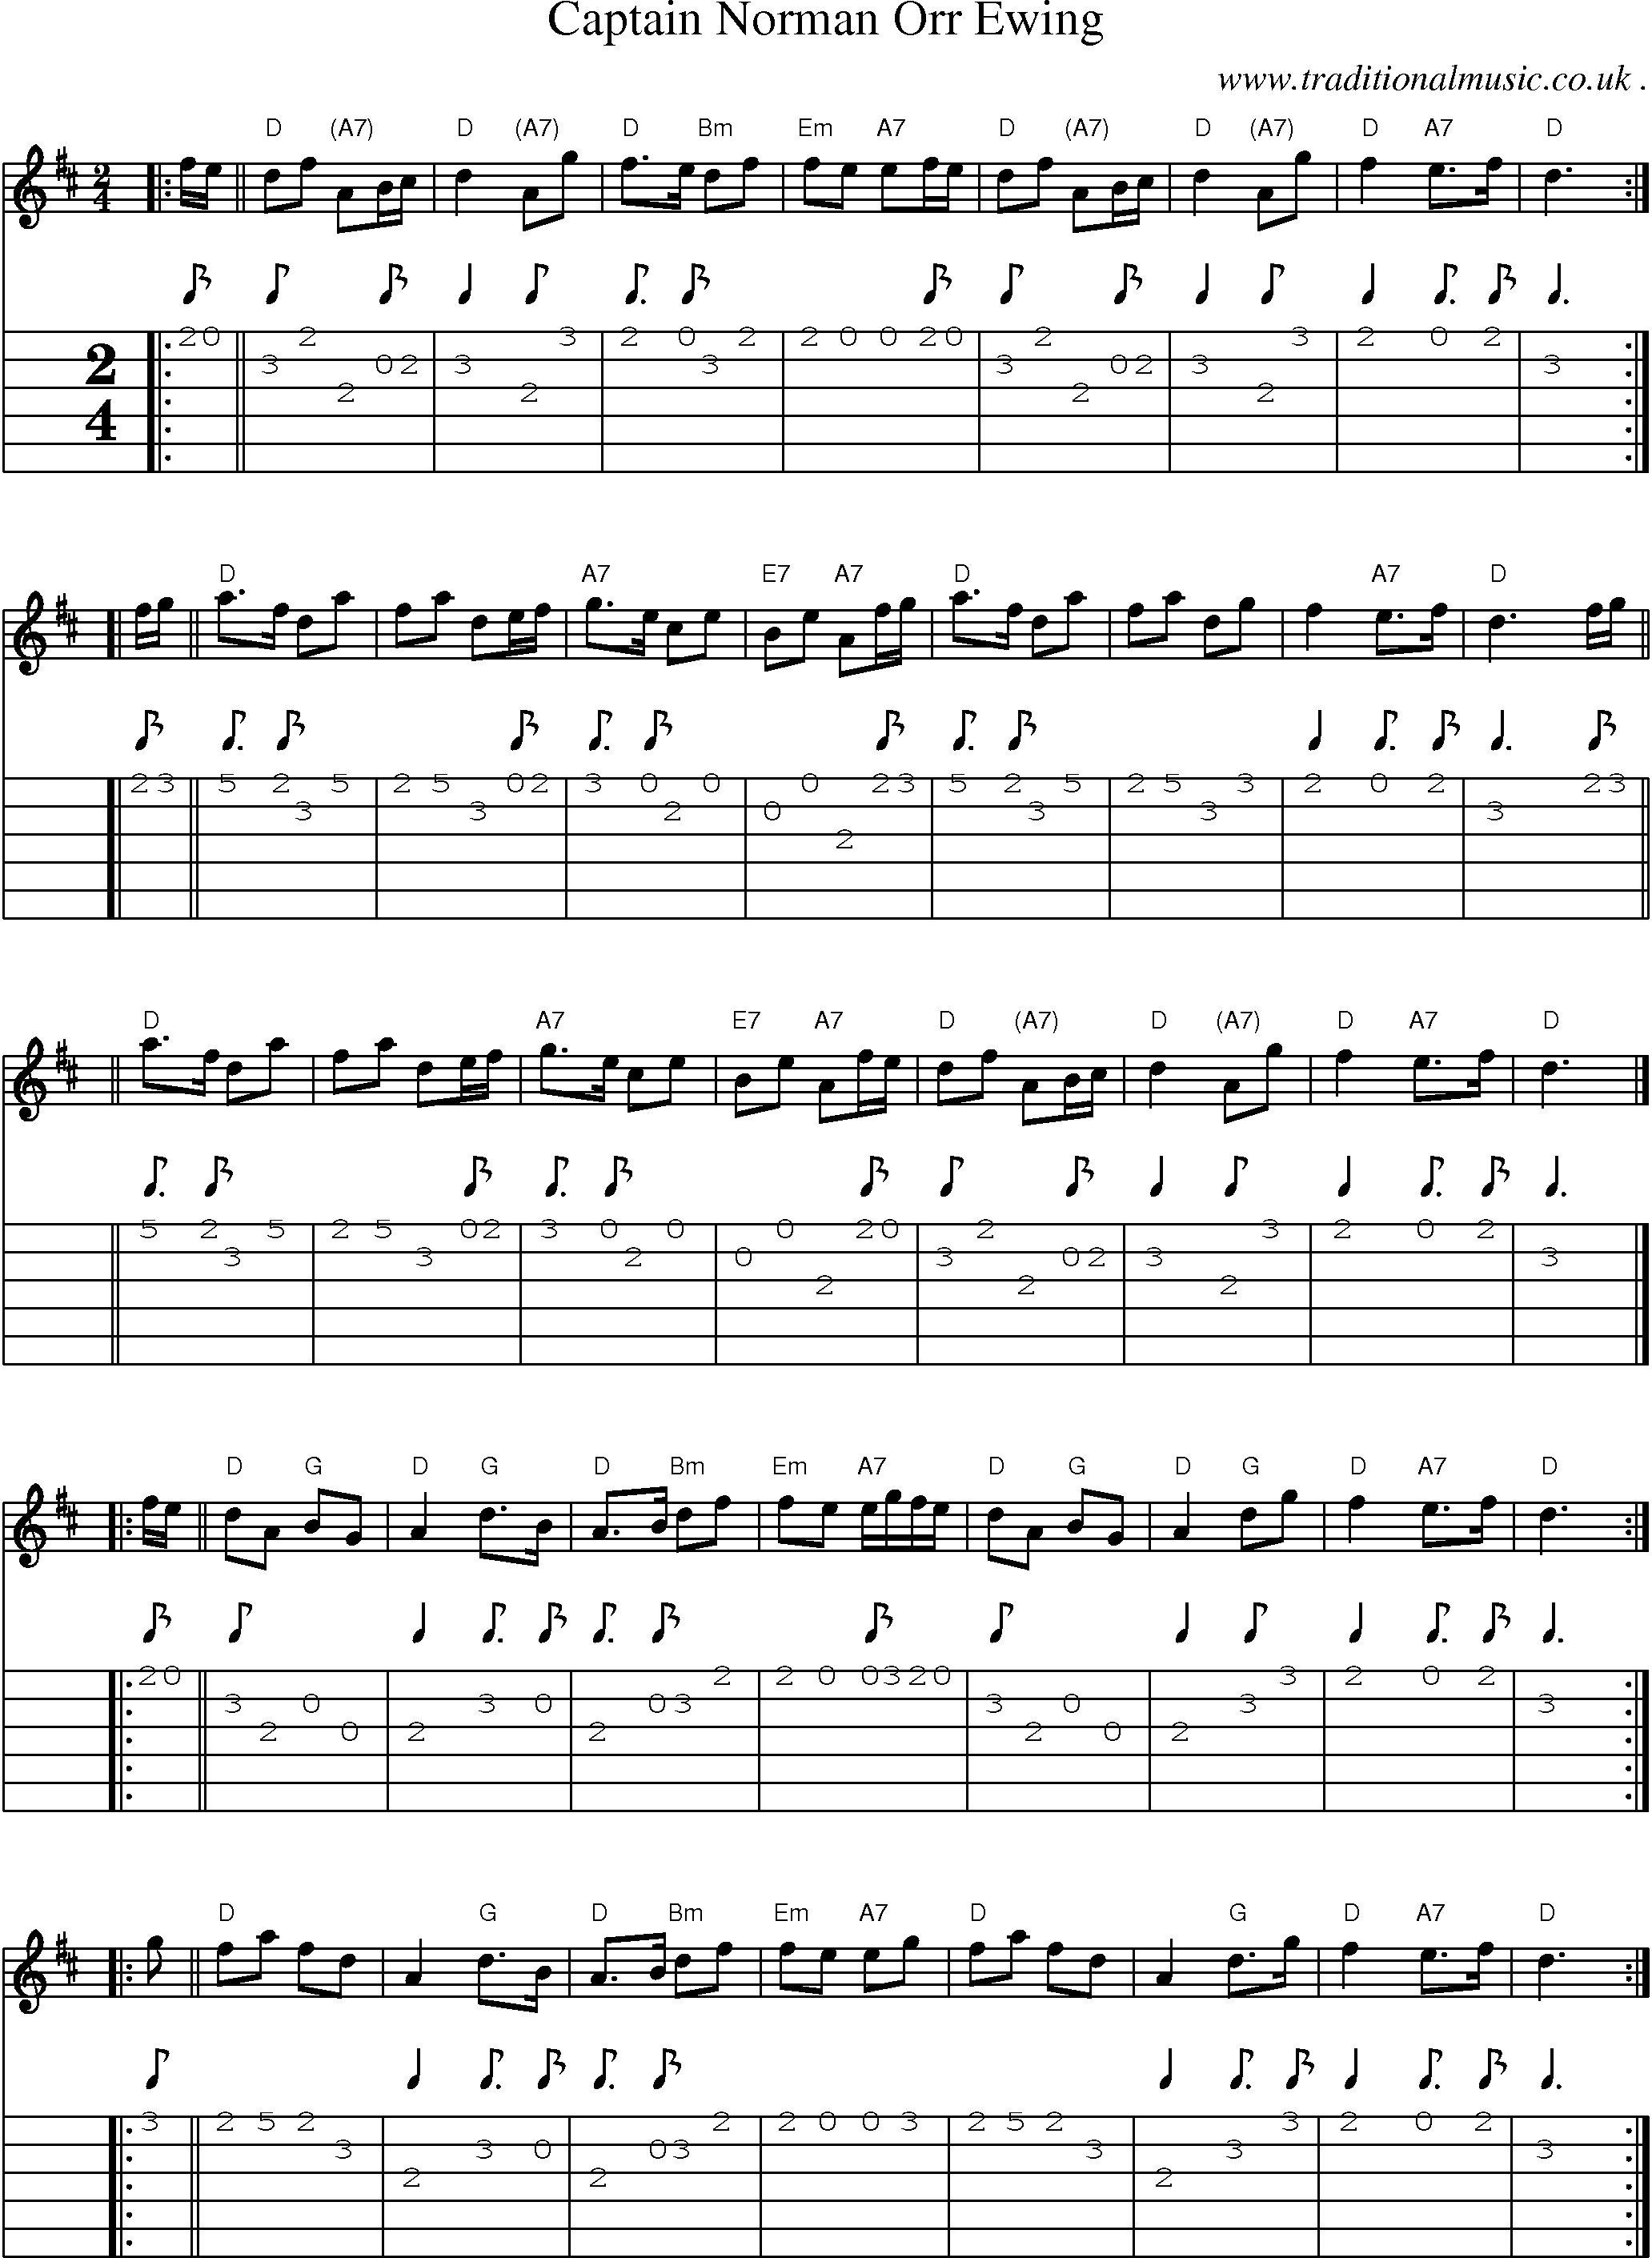 Sheet-music  score, Chords and Guitar Tabs for Captain Norman Orr Ewing